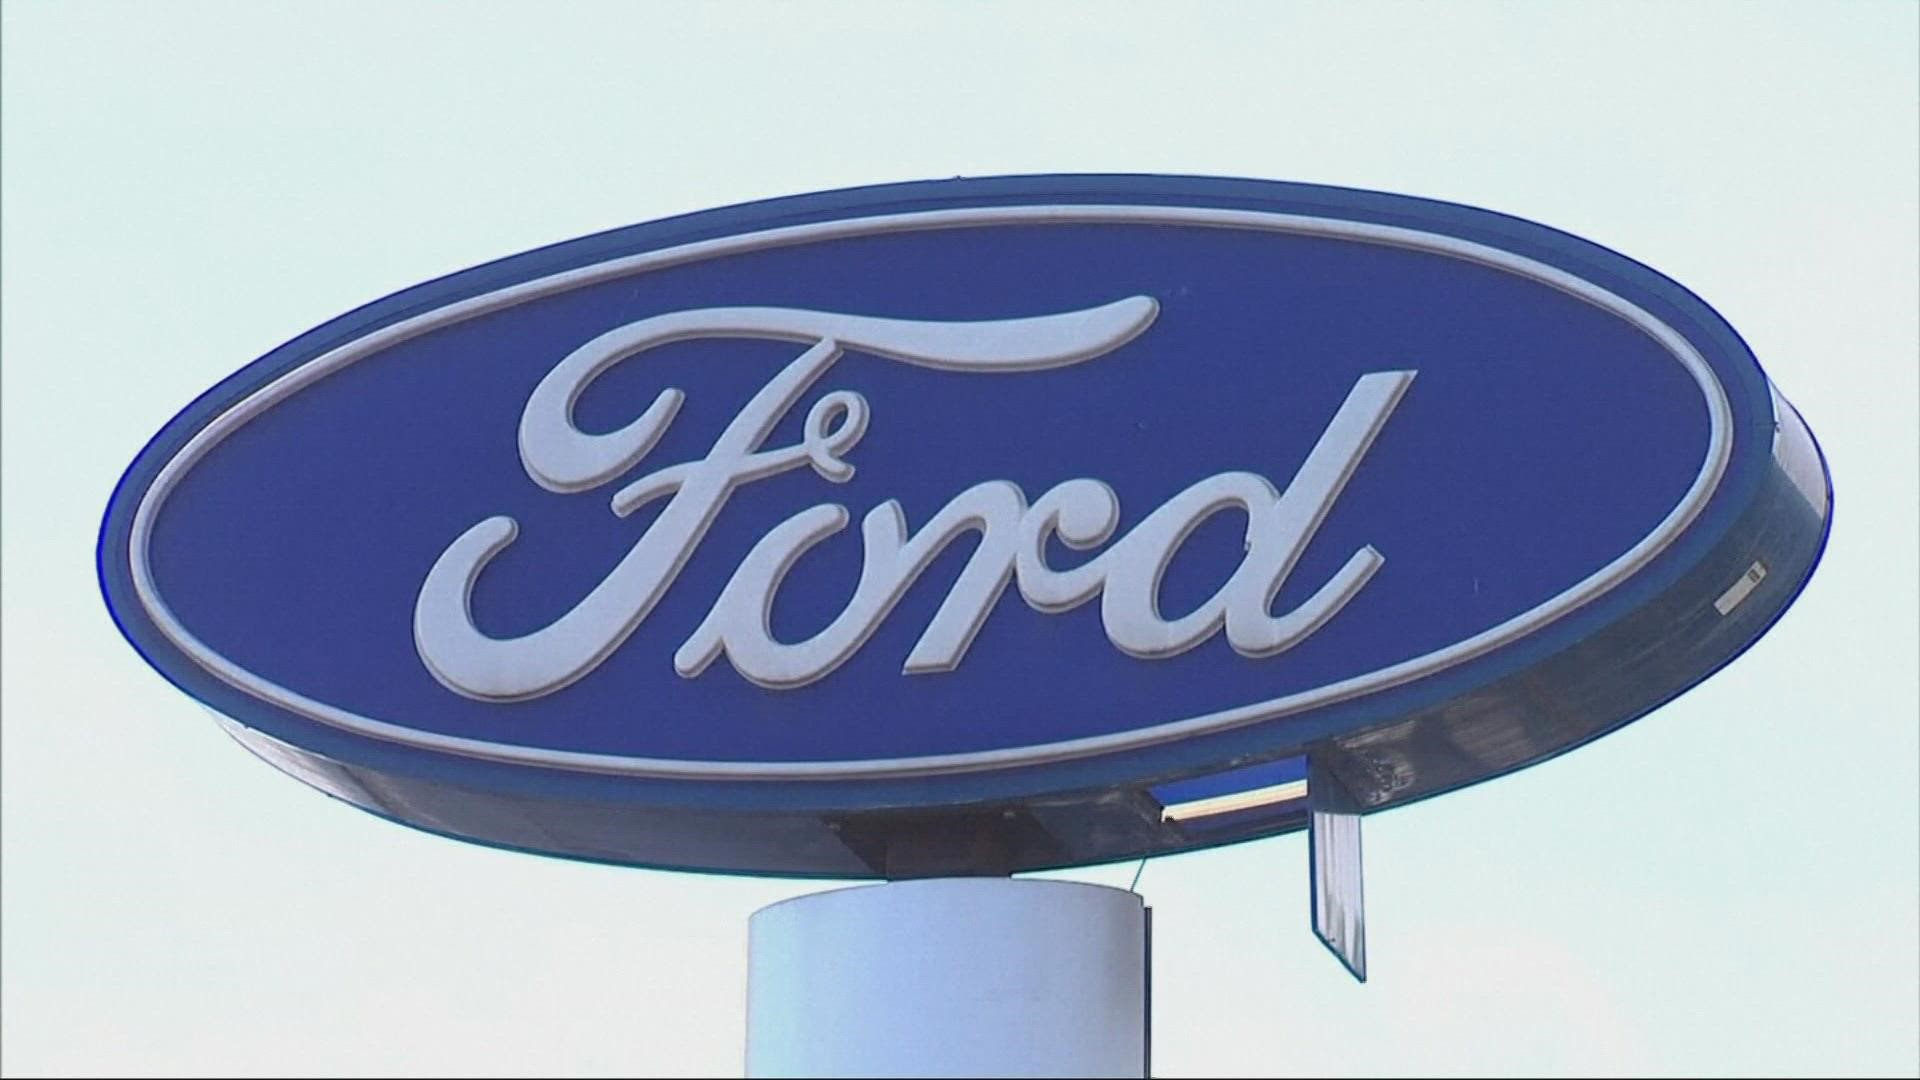 About 3,000 white-collar workers at Ford Motor Co. will lose their jobs as the company cuts costs to help make the long transition from internal combustion vehicles.